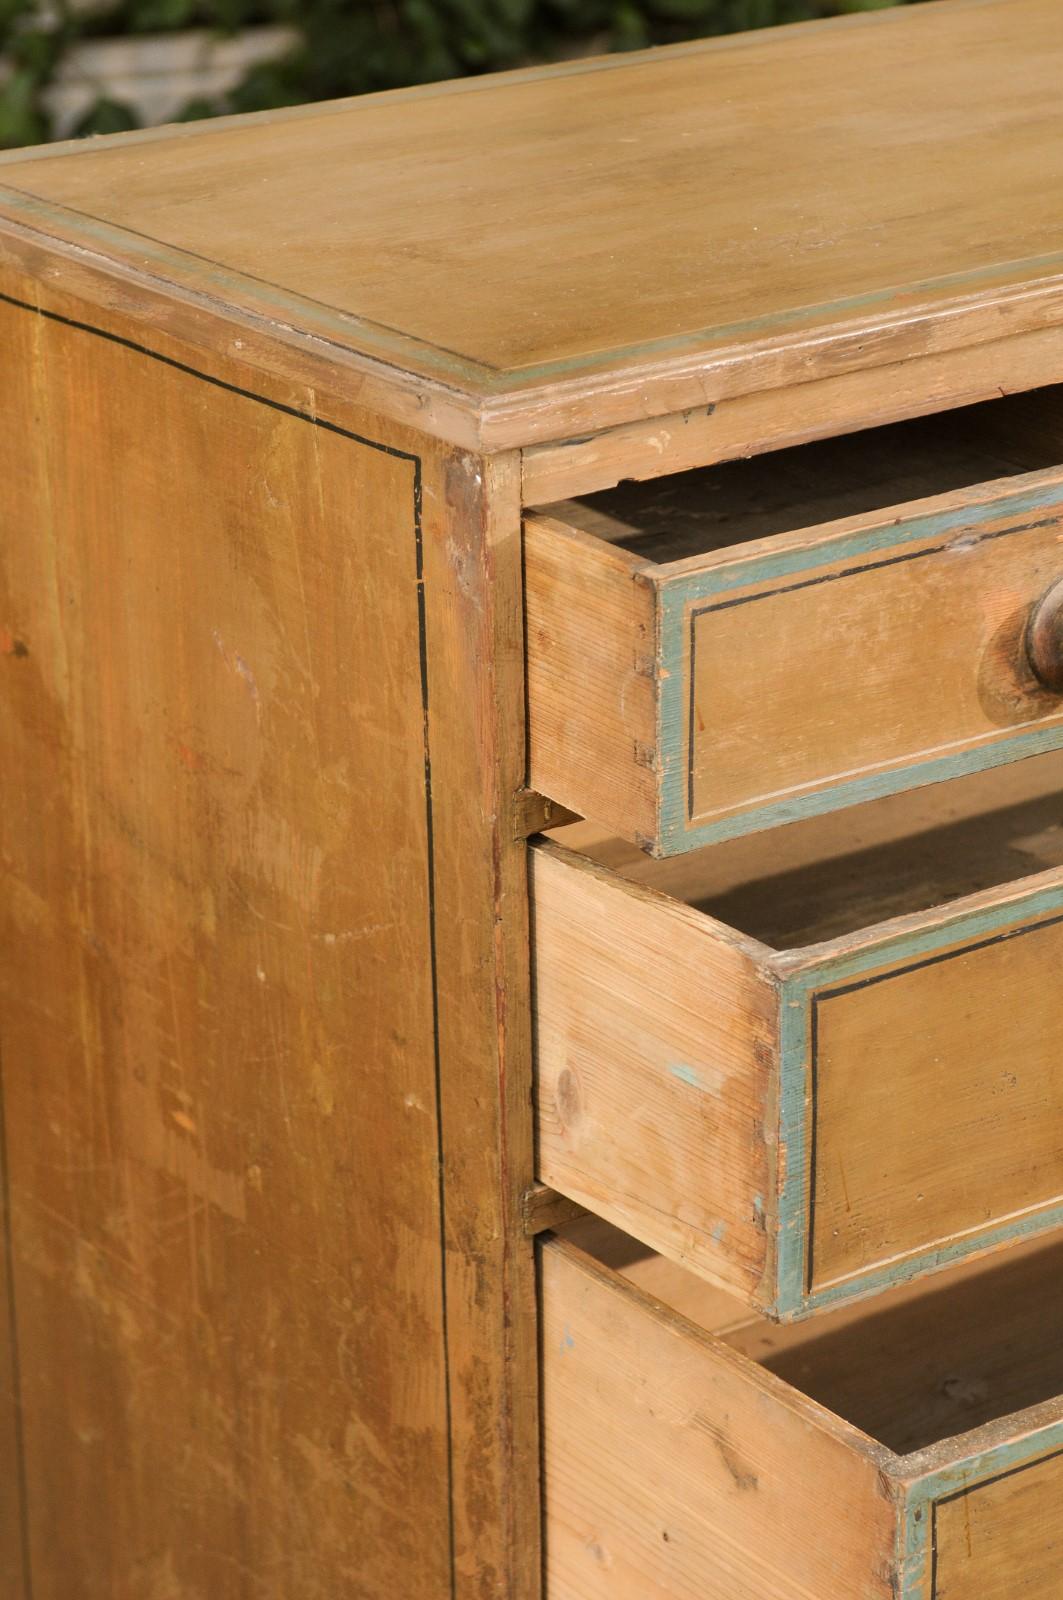 English 1850s Painted Wood Five-Drawer Chest with Turned Feet and Patina (19. Jahrhundert)